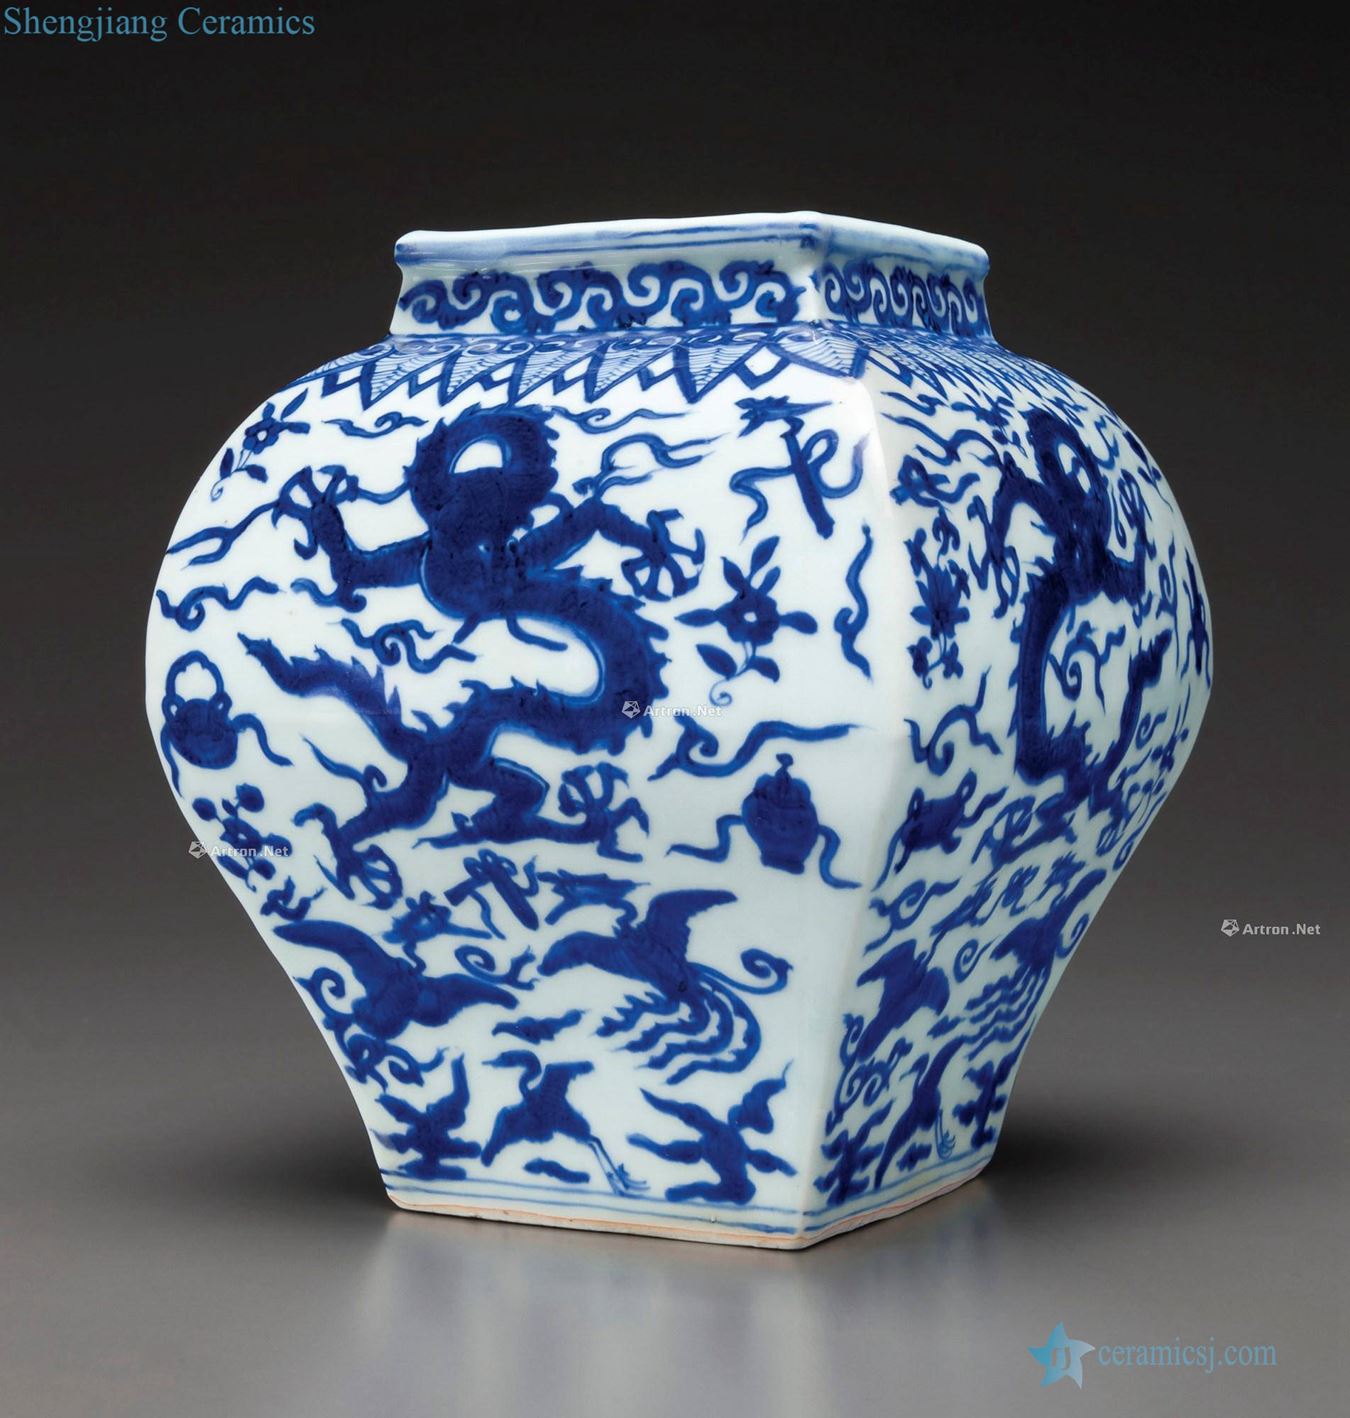 Wanli period (1573-1619), A RARE BLUE AND WHITE FACETED 'DRAGON' JAR